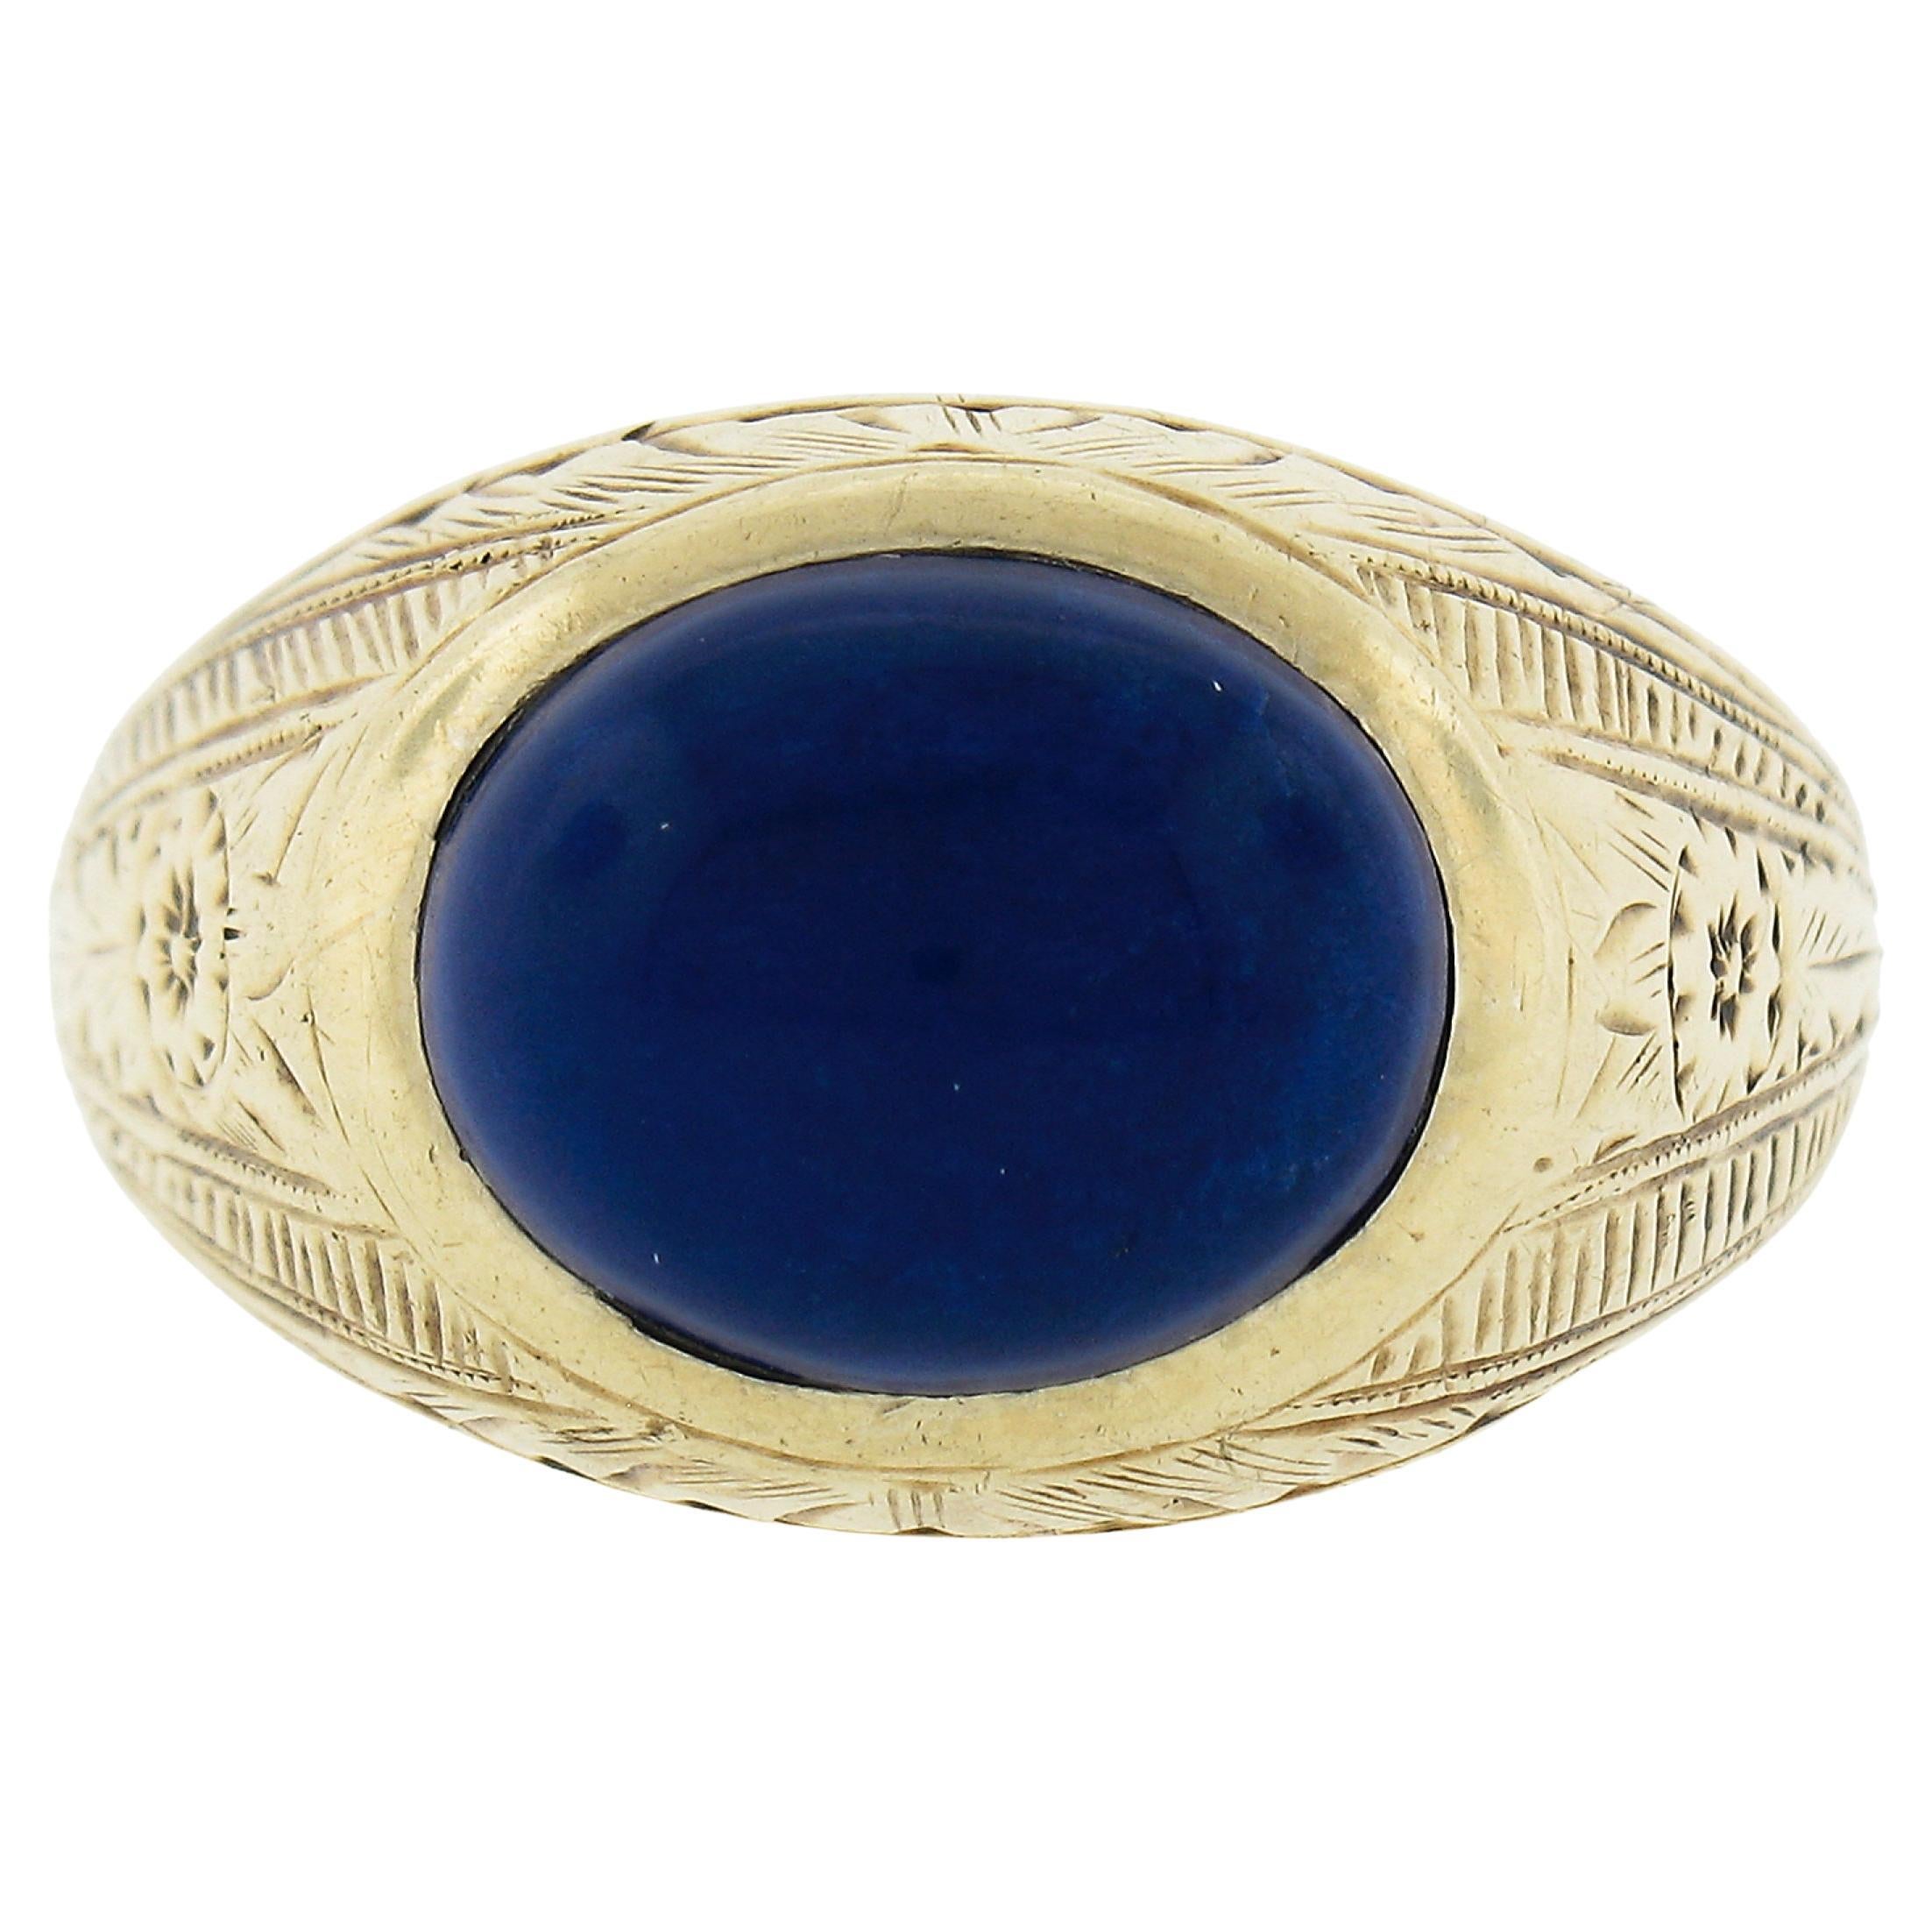 Antique Men's 14k Yellow Gold Oval Cabochon Bezel Lapis Hand Engraved Work Ring